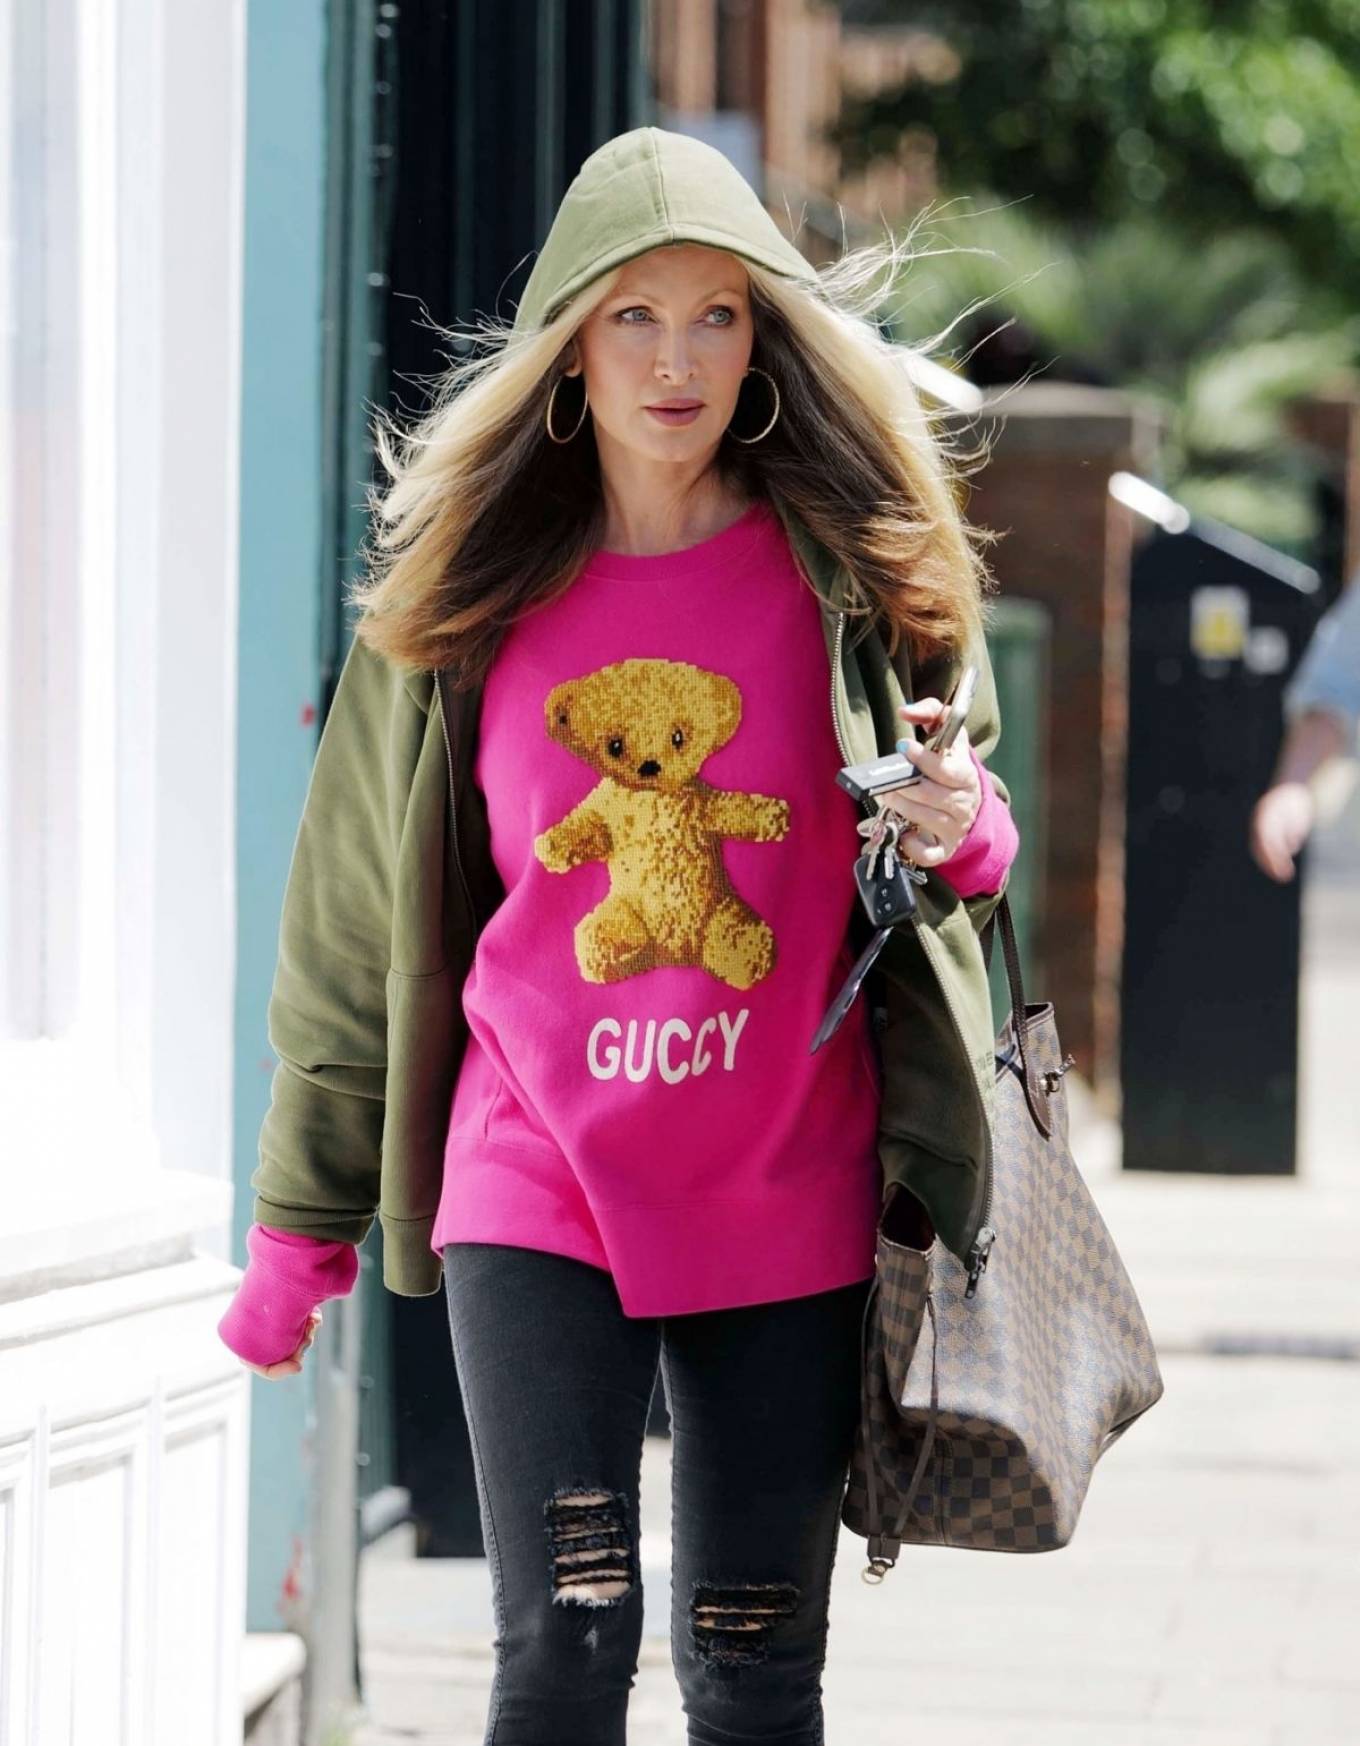 Caprice Bourret 2020 : Caprice Bourret – Shopping candids in London-03